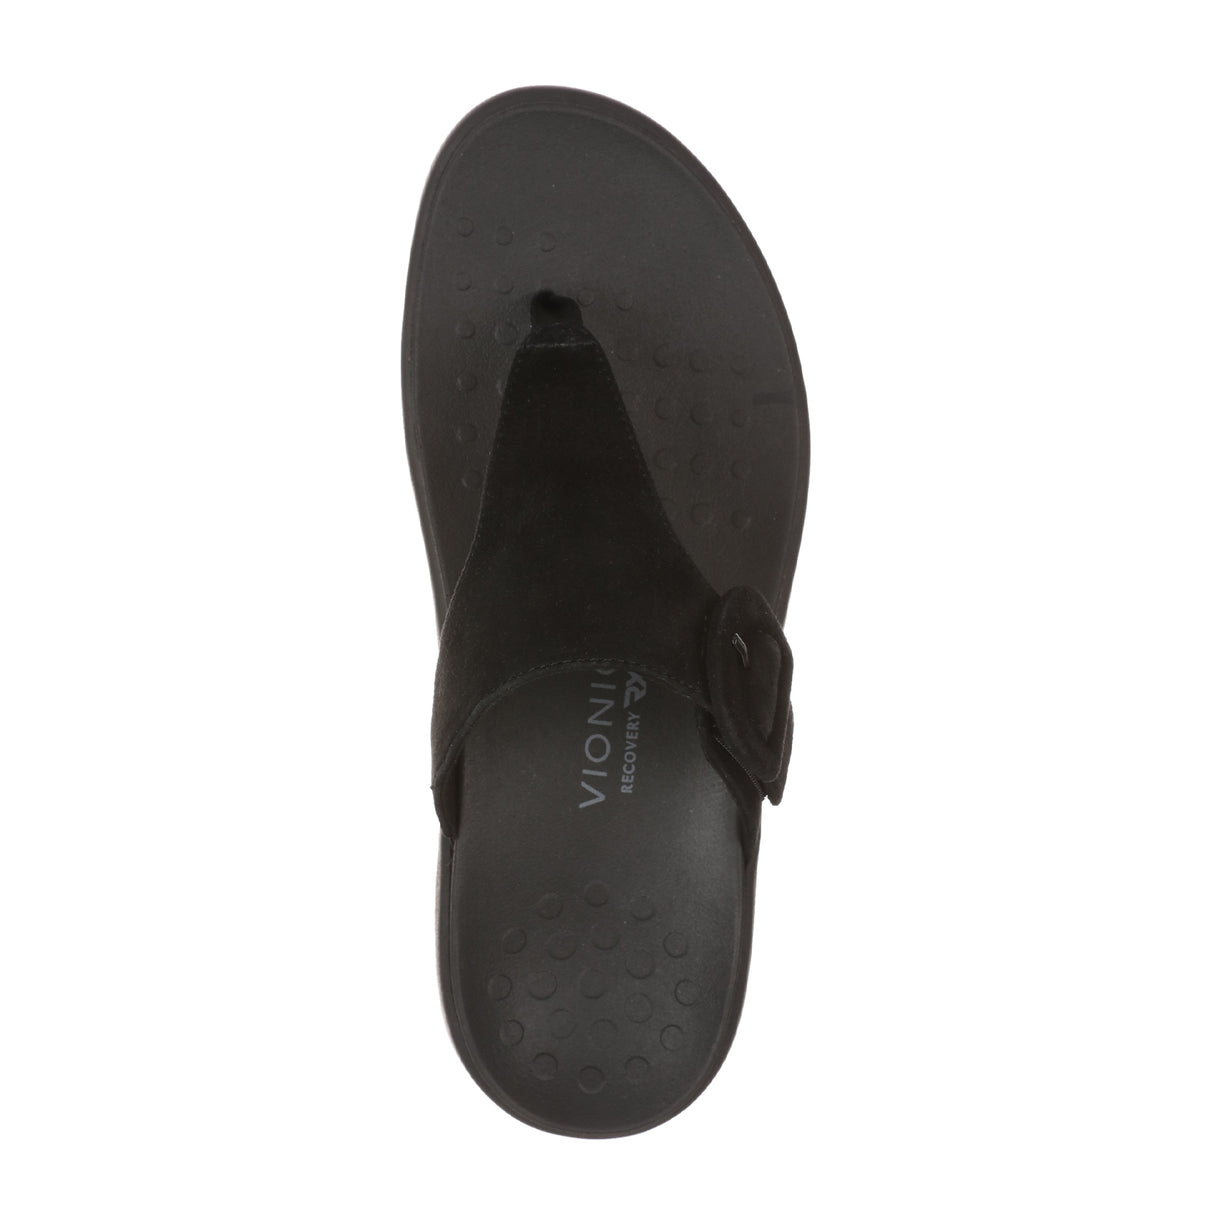 Vionic Activate Sandal (Women) - Black Suede Sandals - Thong - The Heel Shoe Fitters